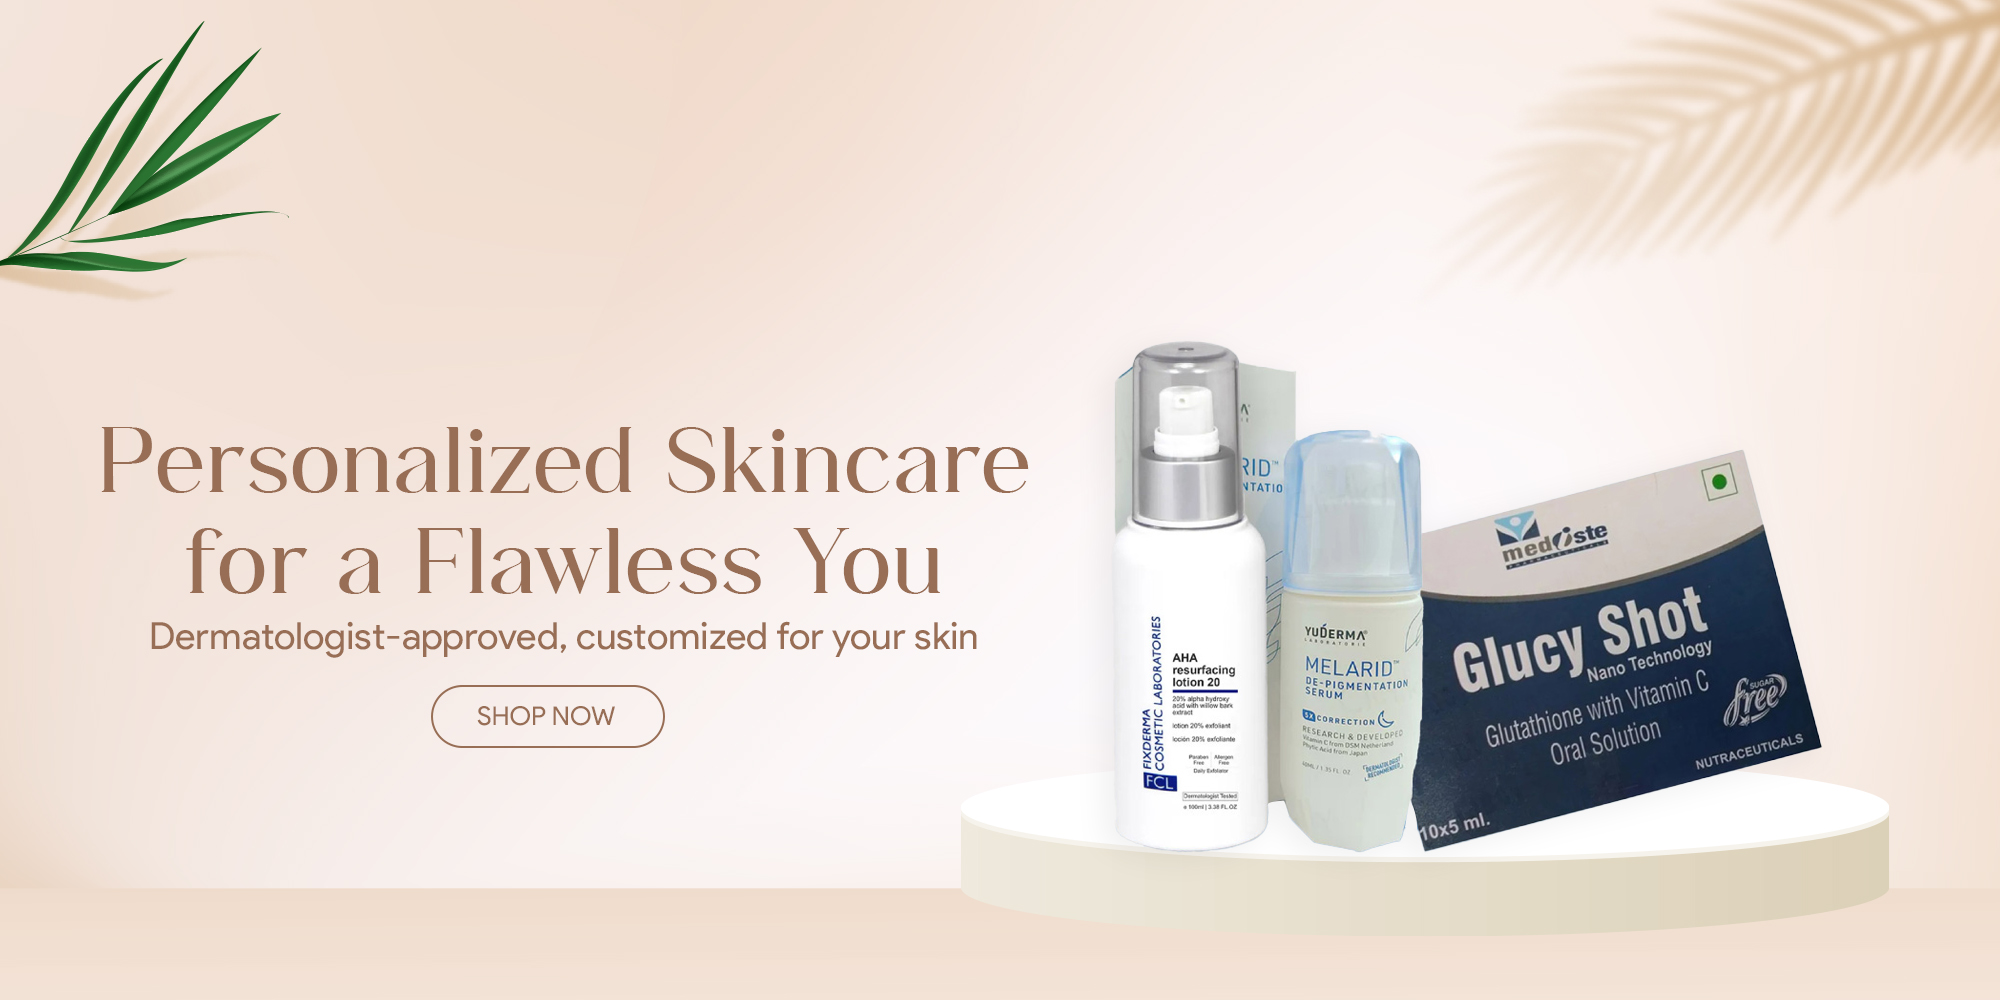 Personalized Skincare products